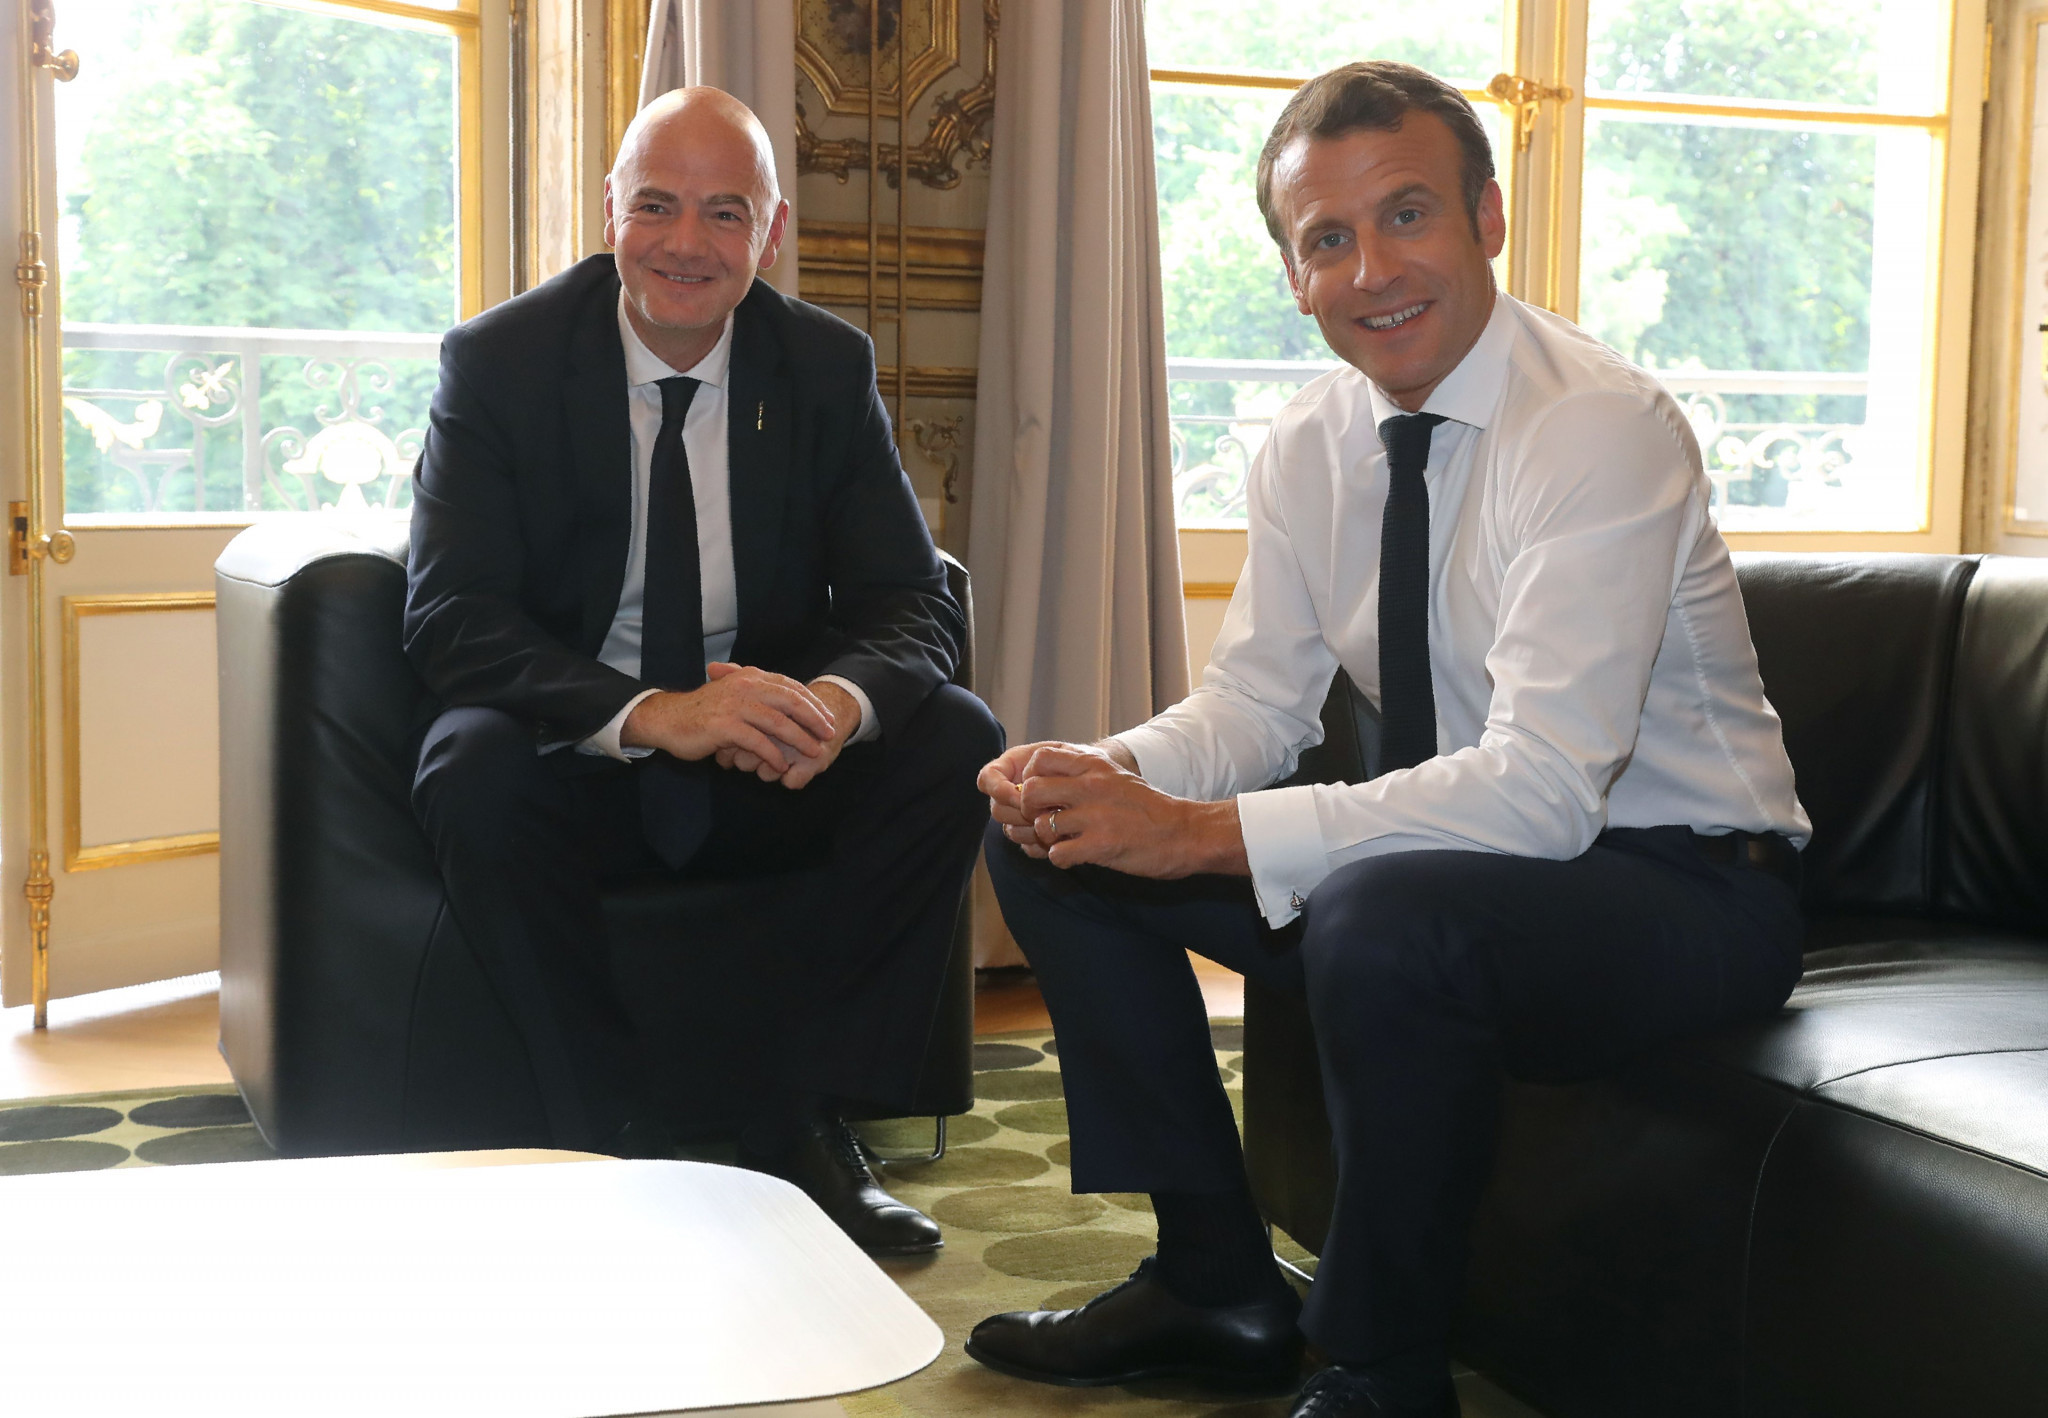 Infantino meets Macron on eve of re-election as FIFA President at Congress in Paris